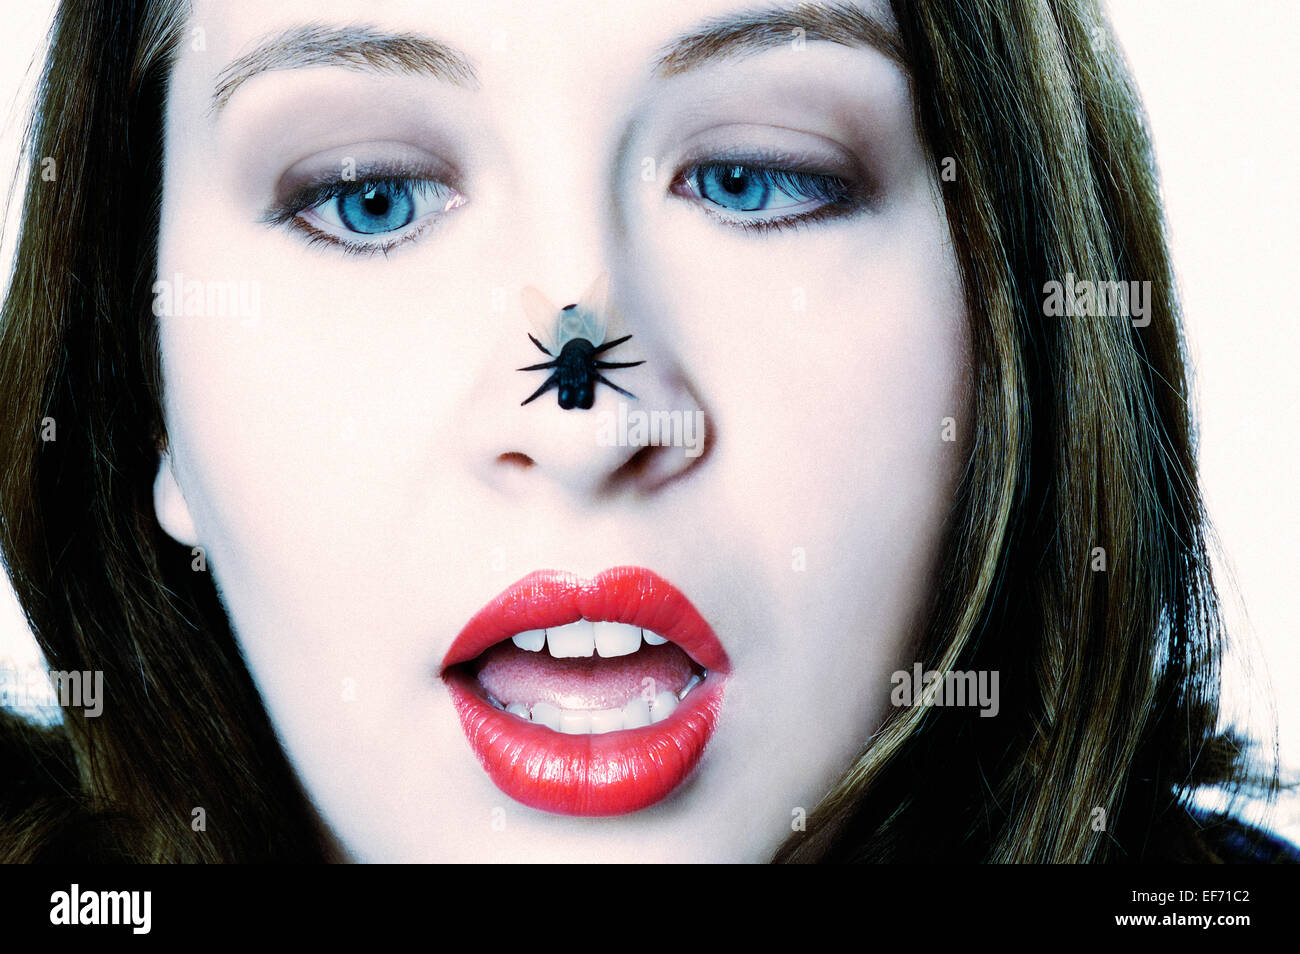 Pretty woman looking at bug on her nose. Stock Photo